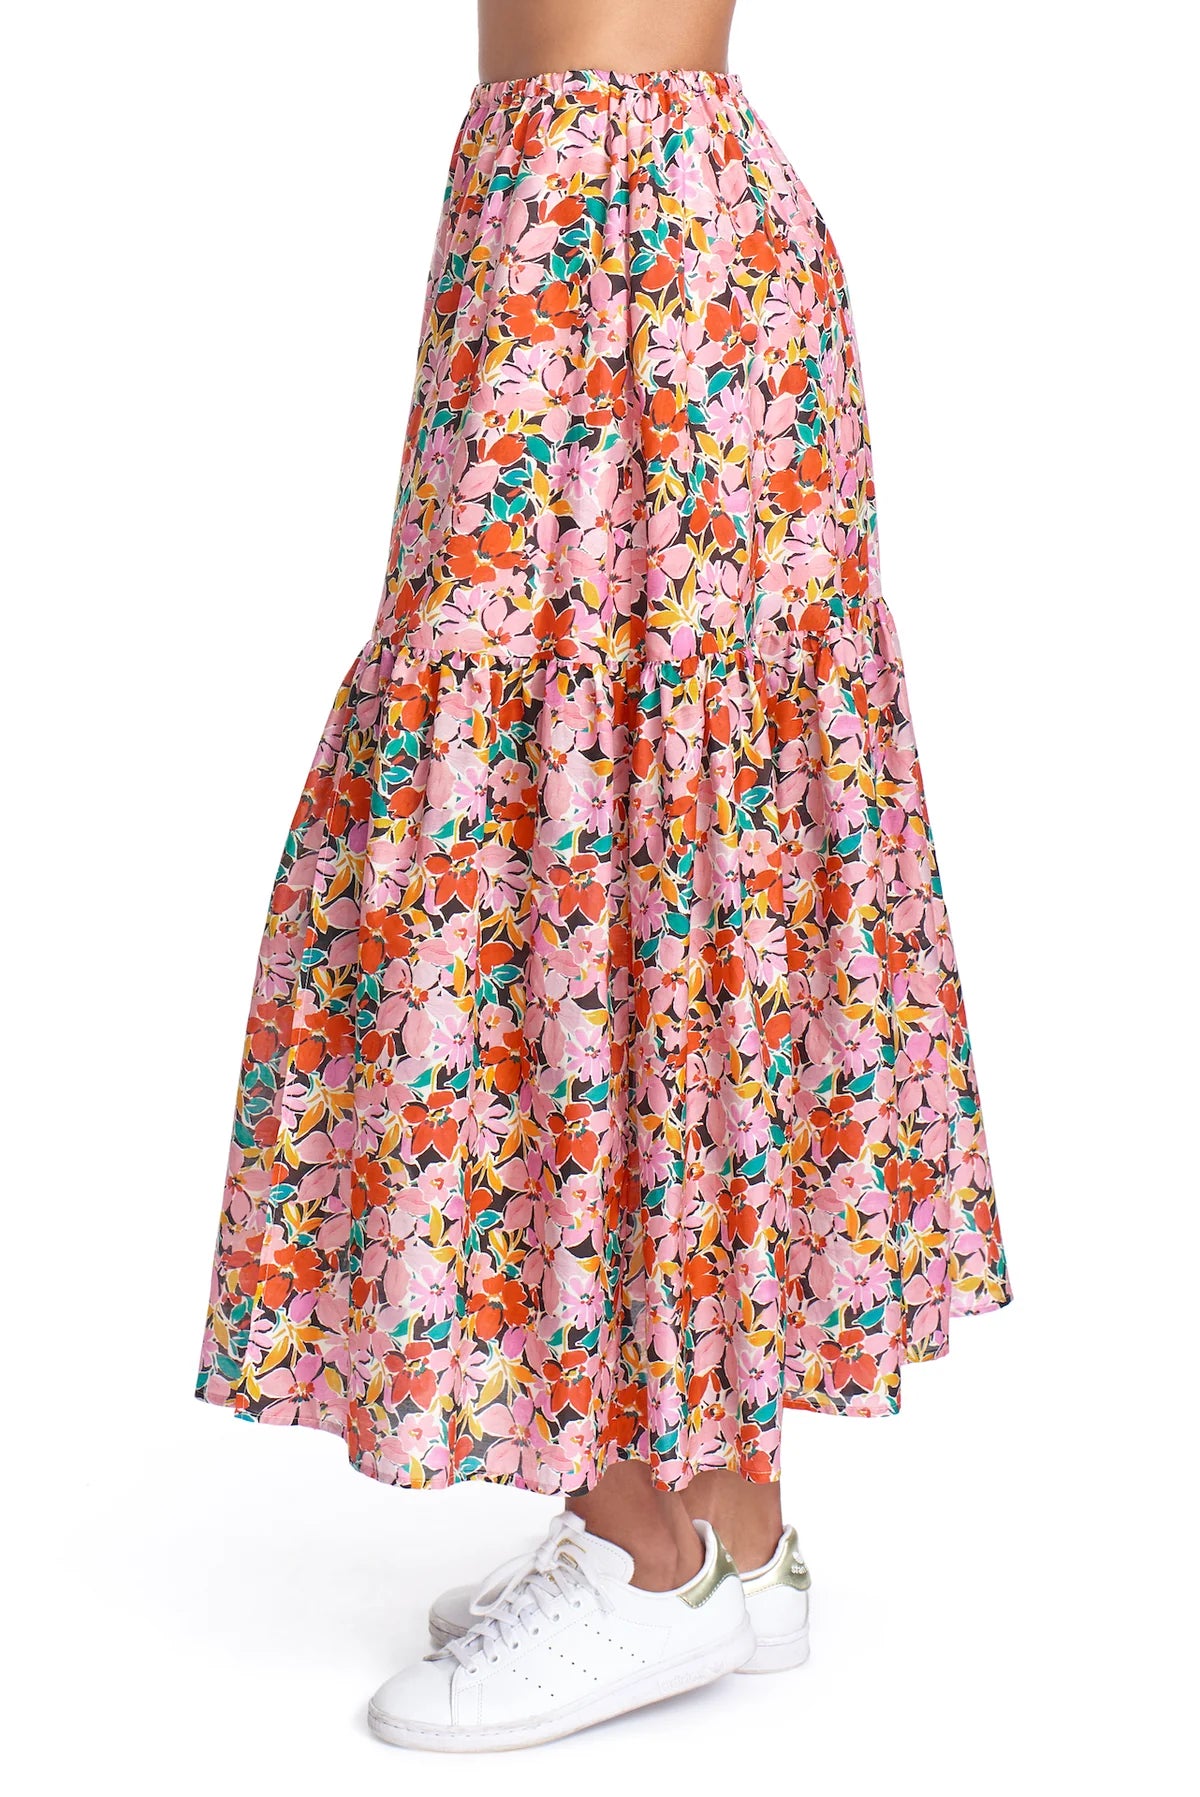 Corey Lynn Calter Lucca Skirt in Multi or Ivory - clever alice